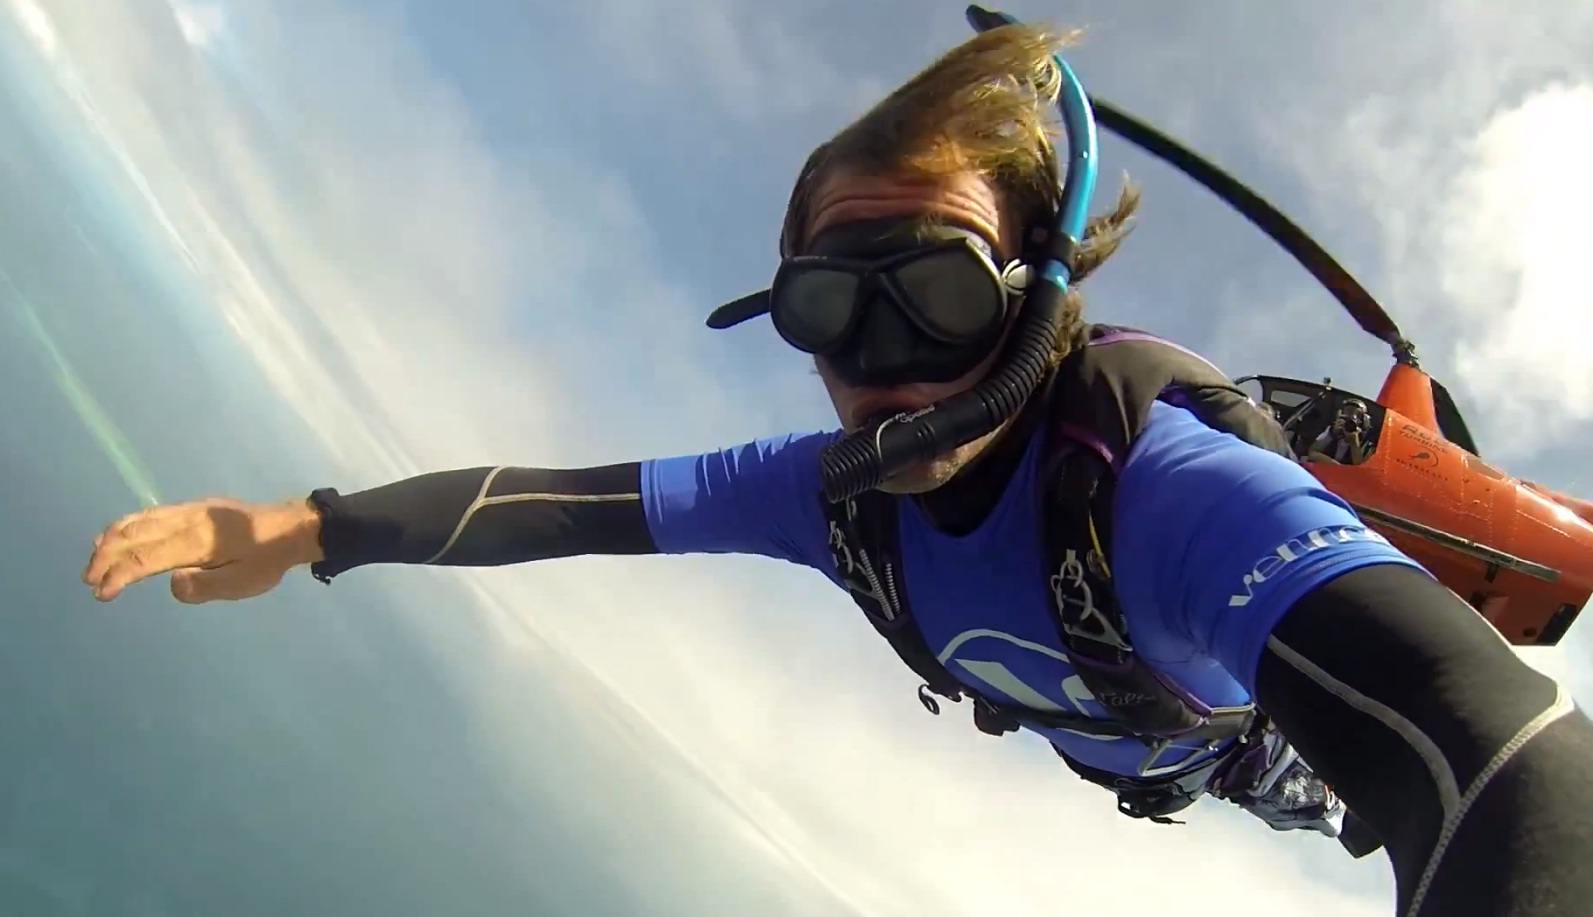 Video Skydiver with Scuba Gear Plunges into Water ActionHub